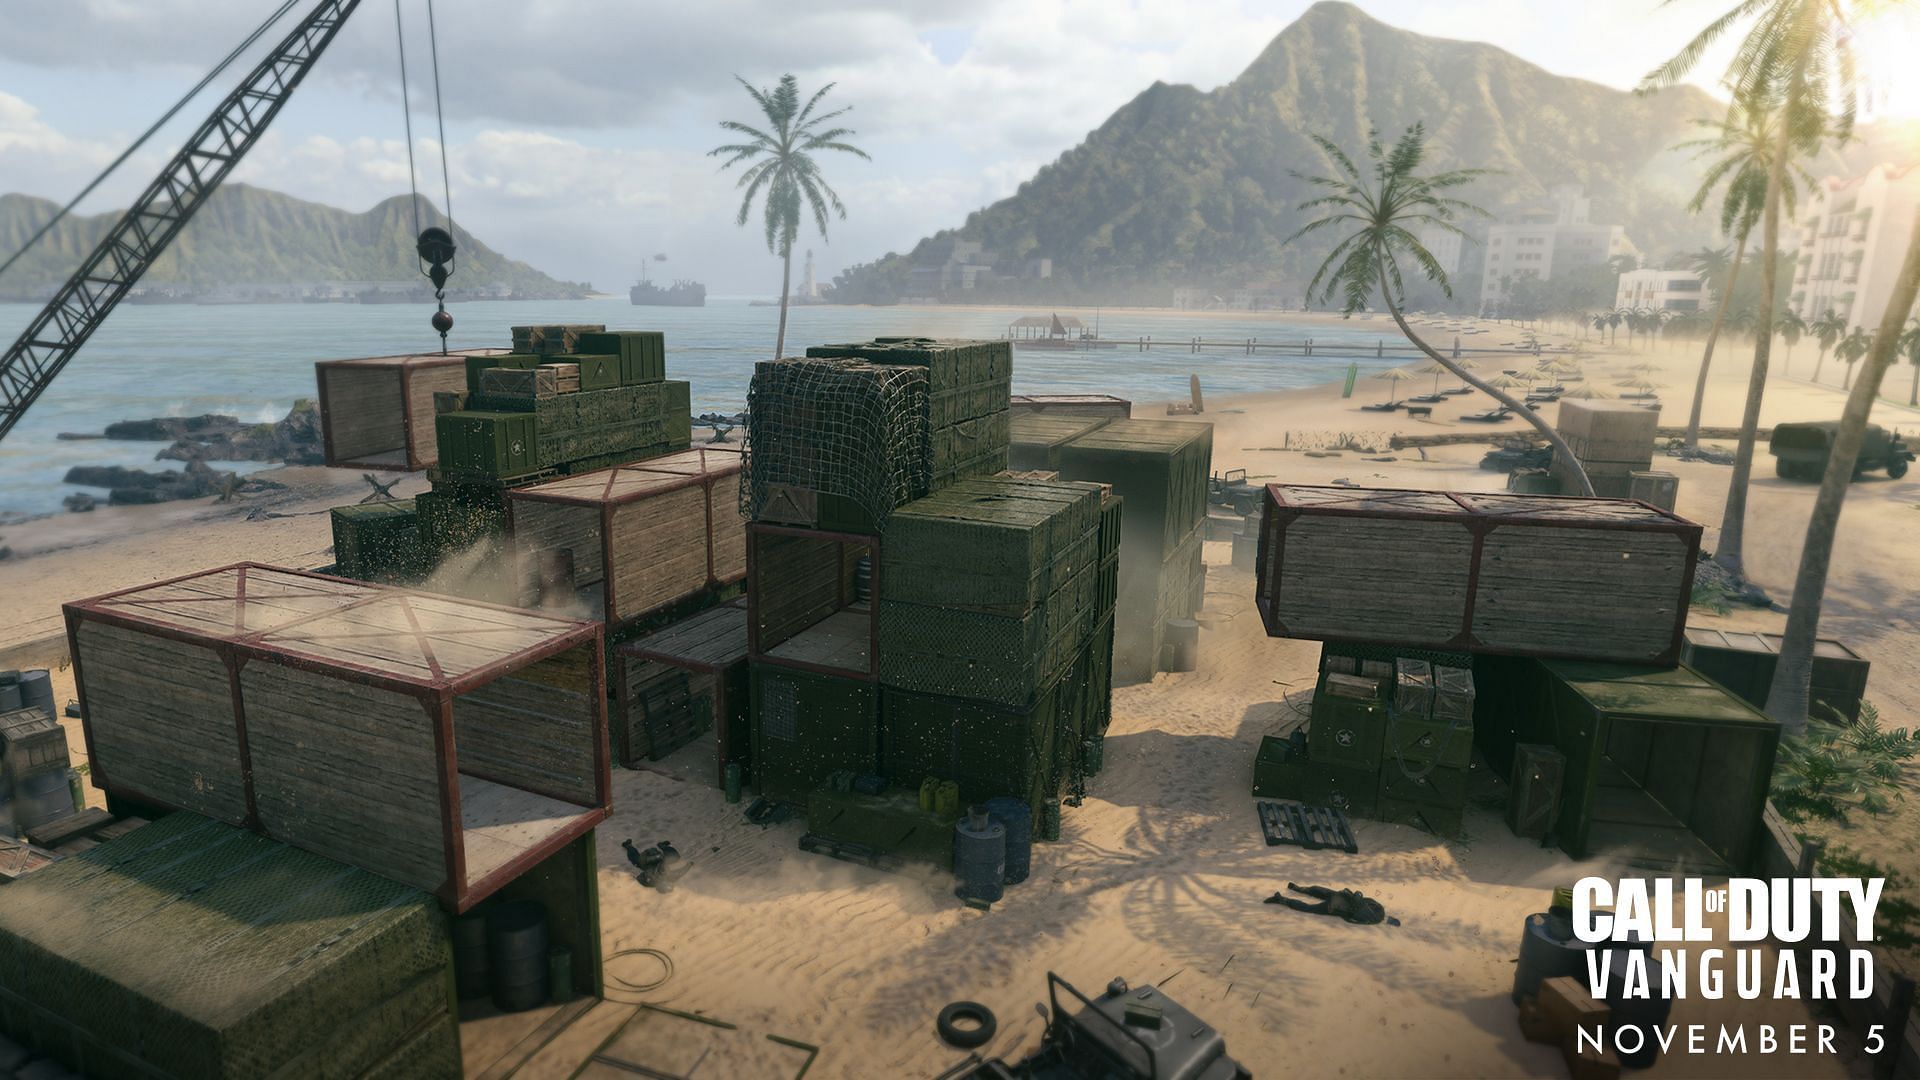 The Shipment map arrived in Call of Duty Vanguard on November 17, 2021 (Image by Activision)